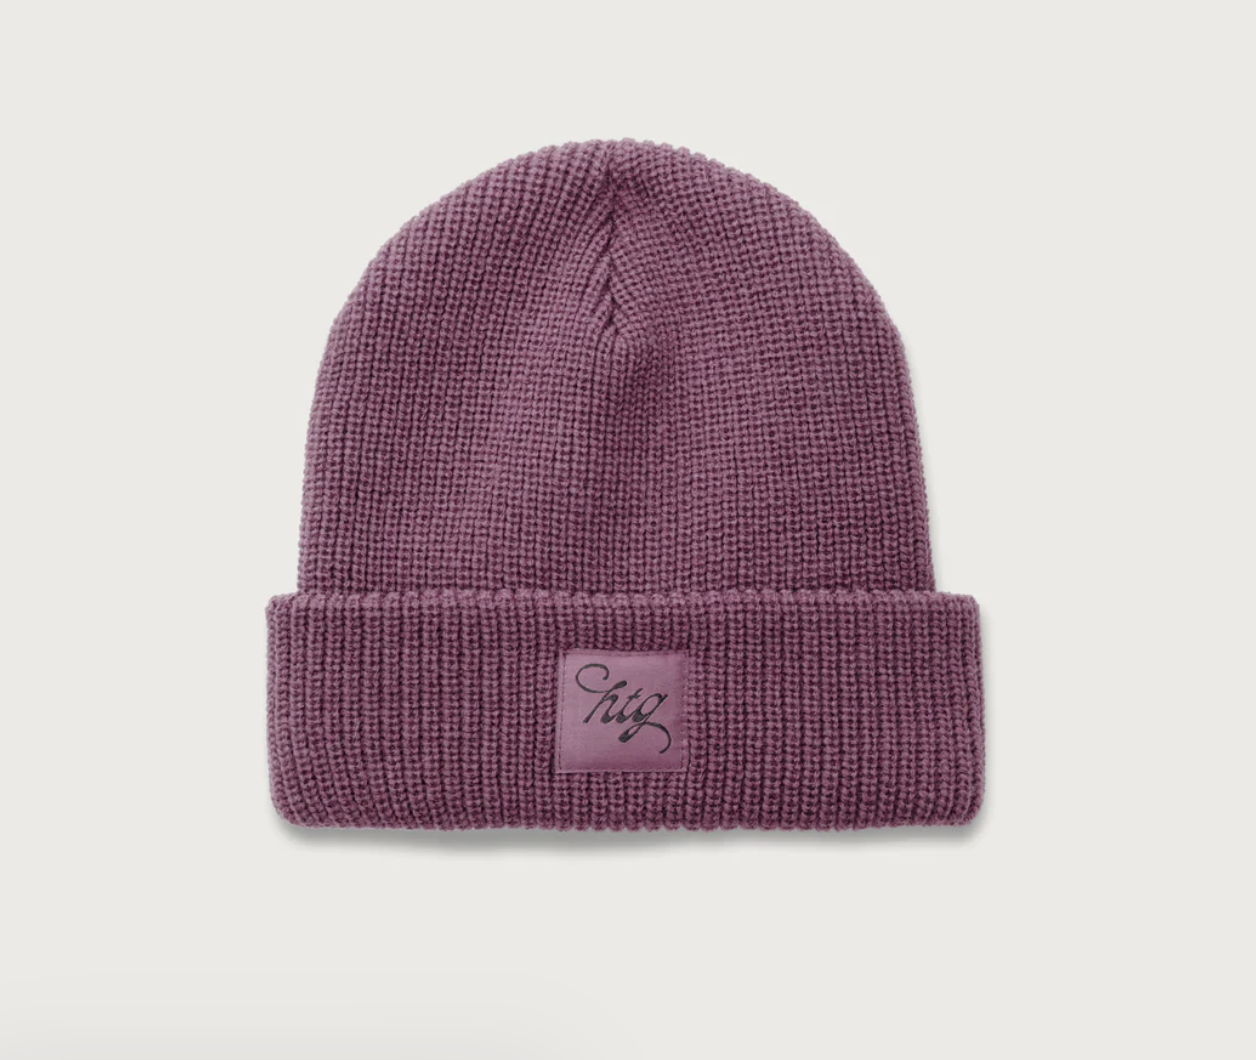 Shop These Beanies To Stay Cozy And Fresh This Winter